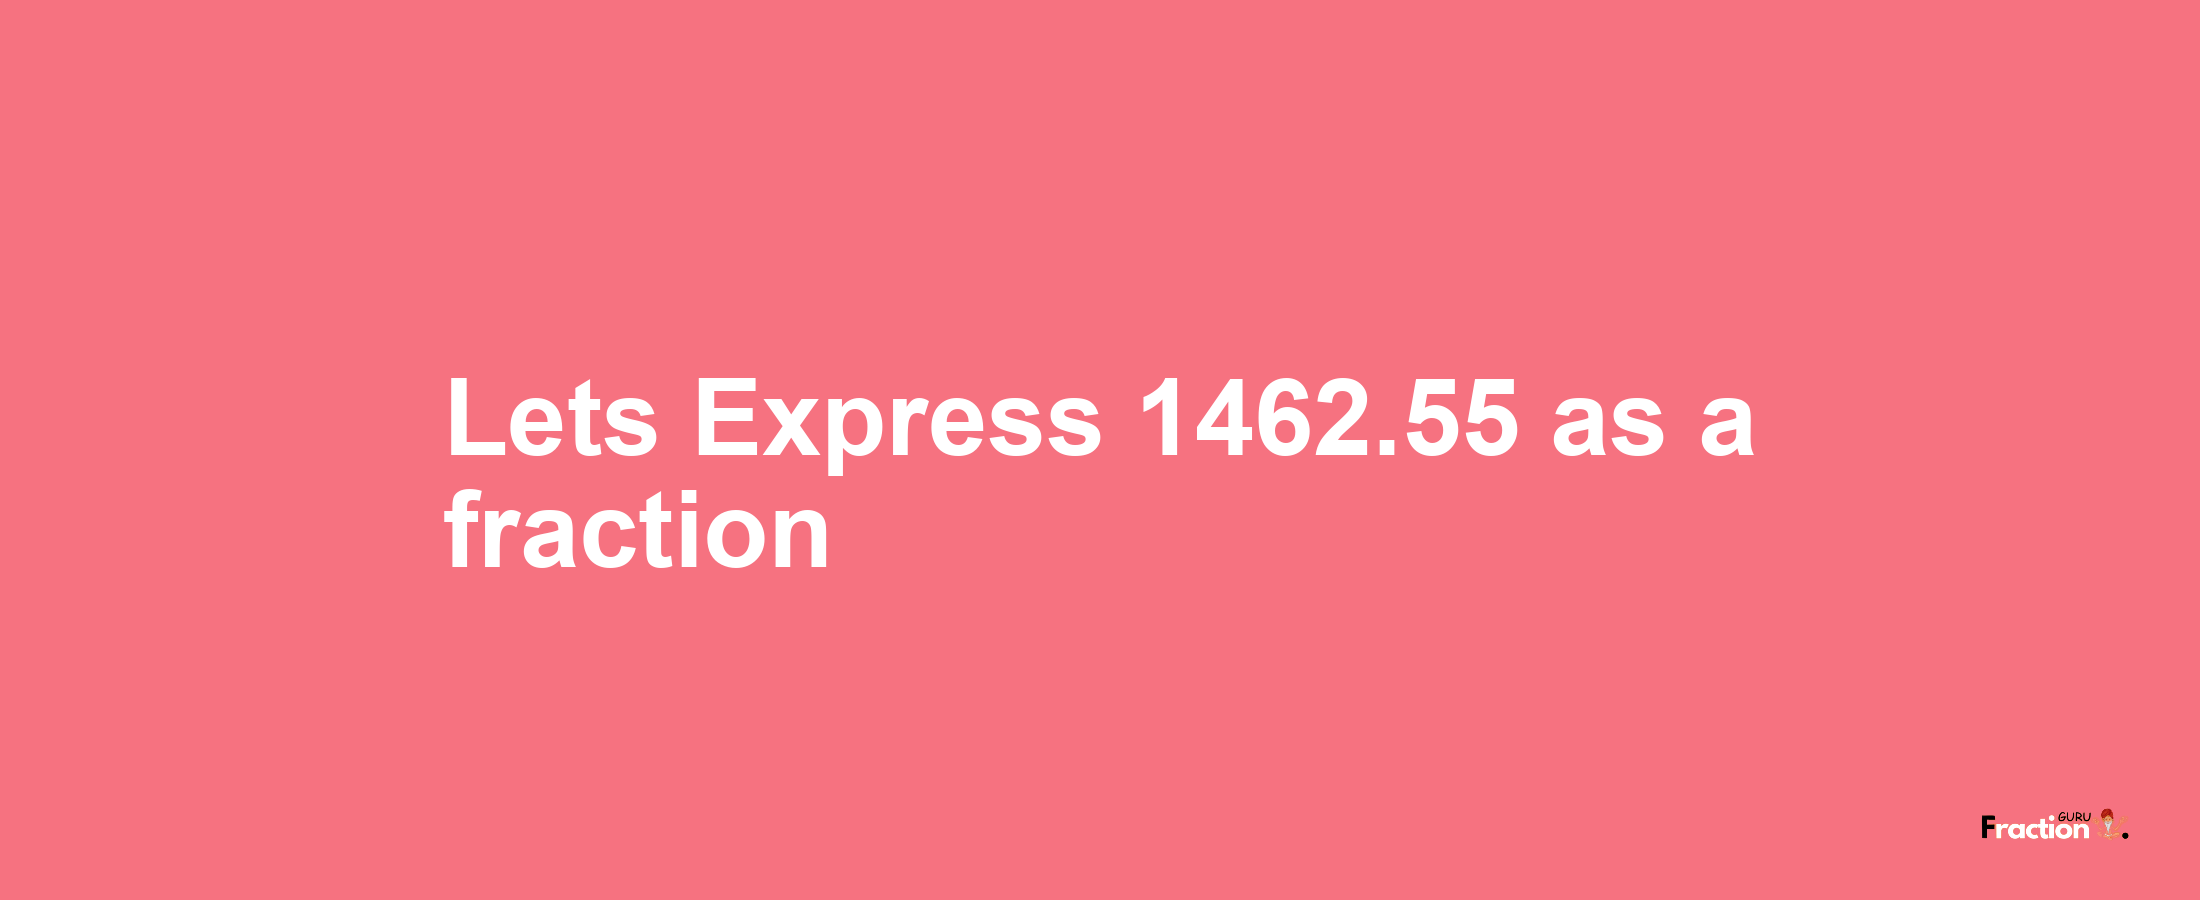 Lets Express 1462.55 as afraction